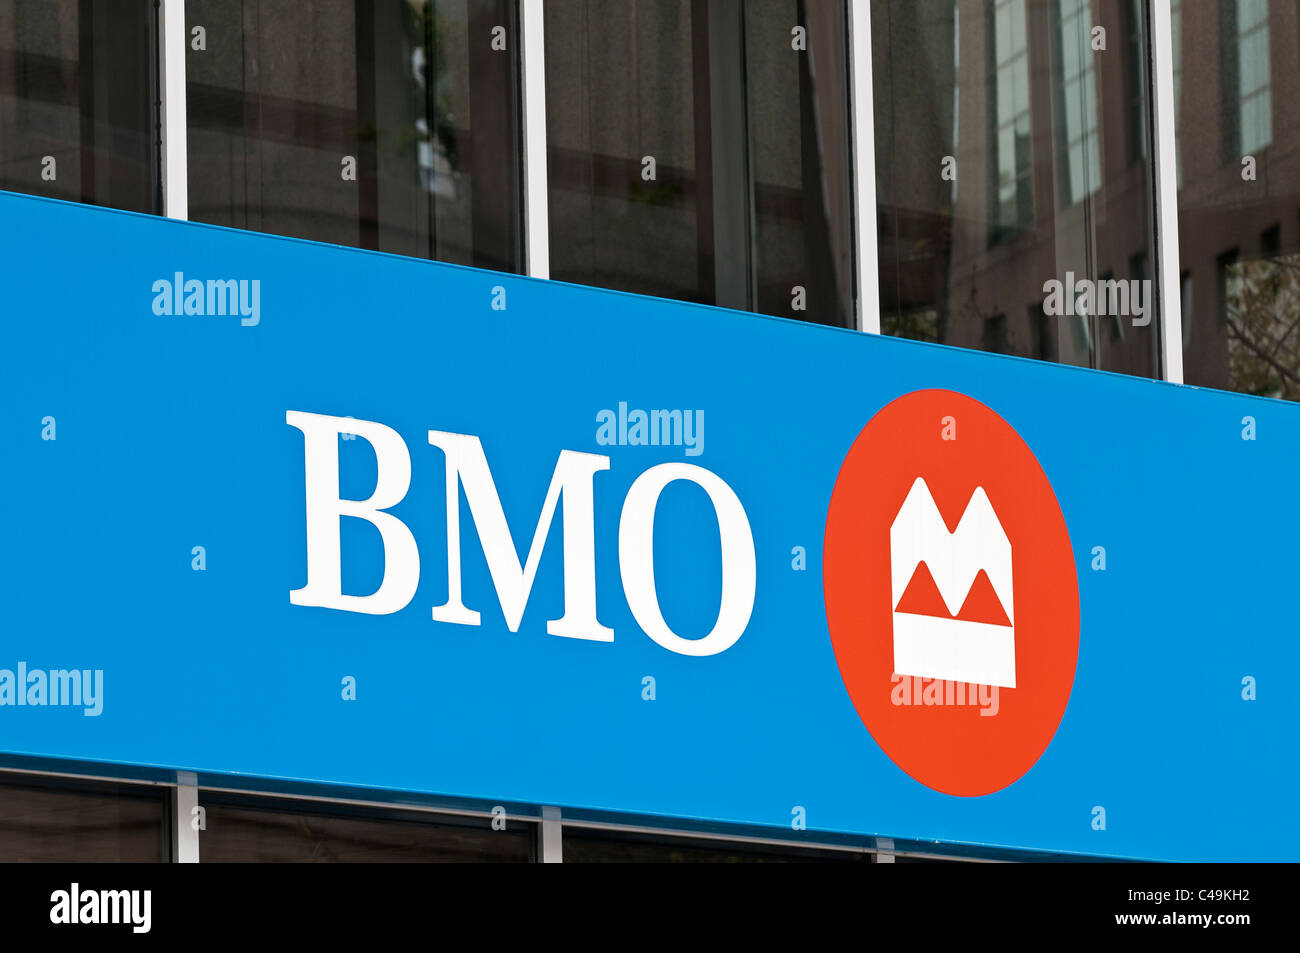 Sign for BMO Bank of Montreal. Stock Photo